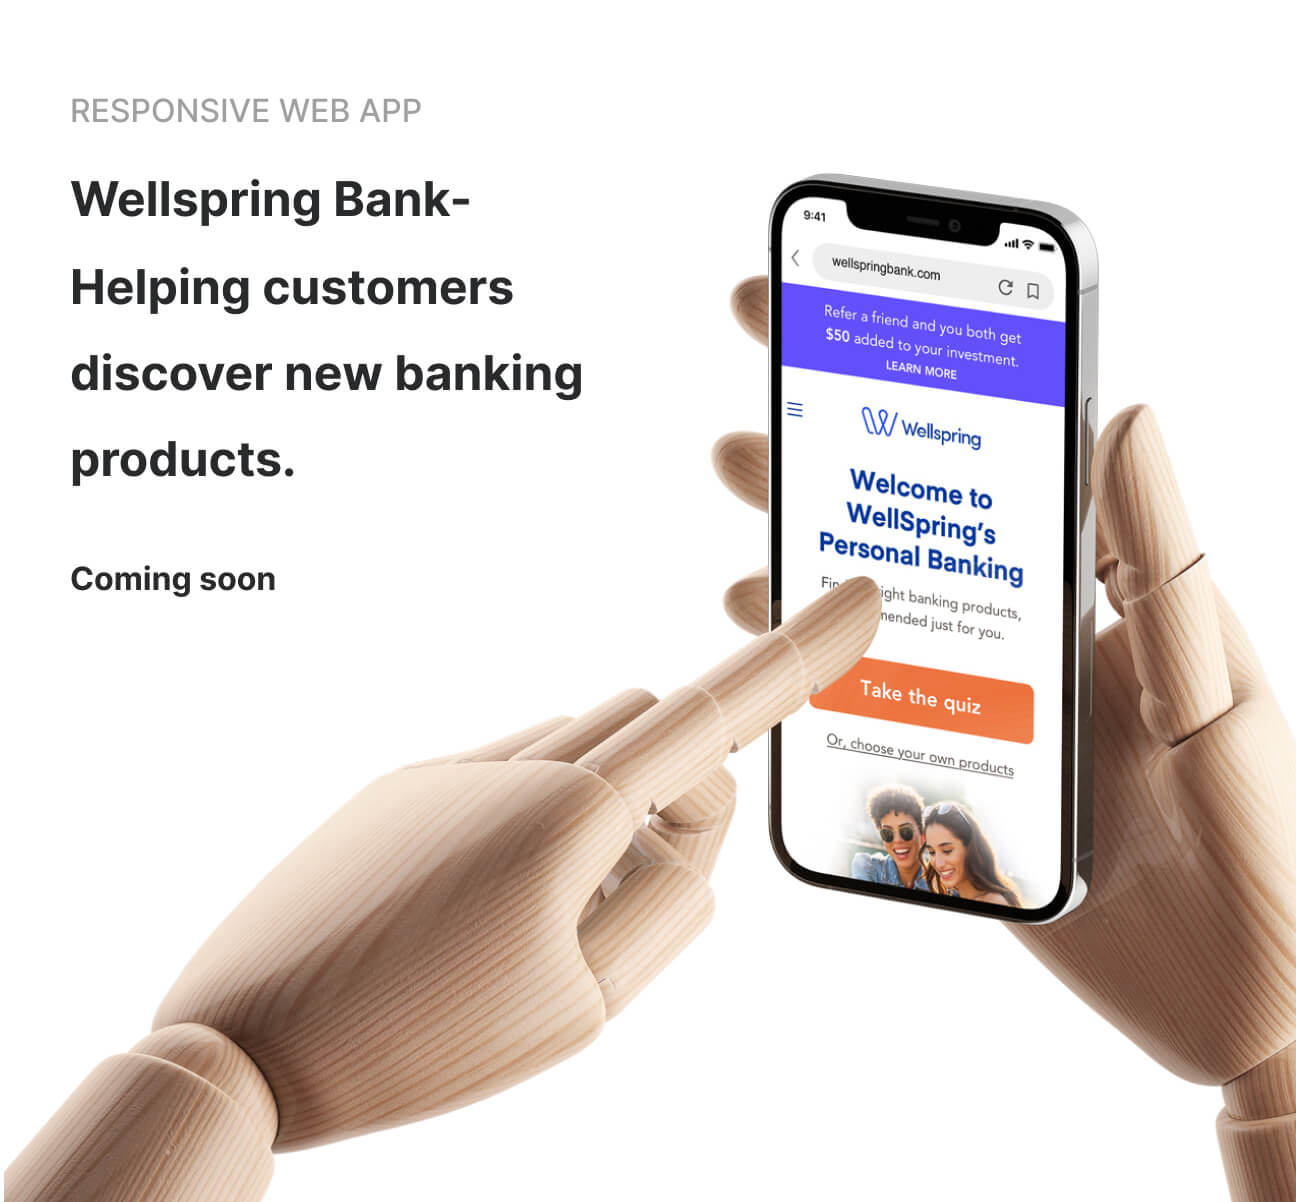 Wellspring Bank - Helping customers discover new banking products.